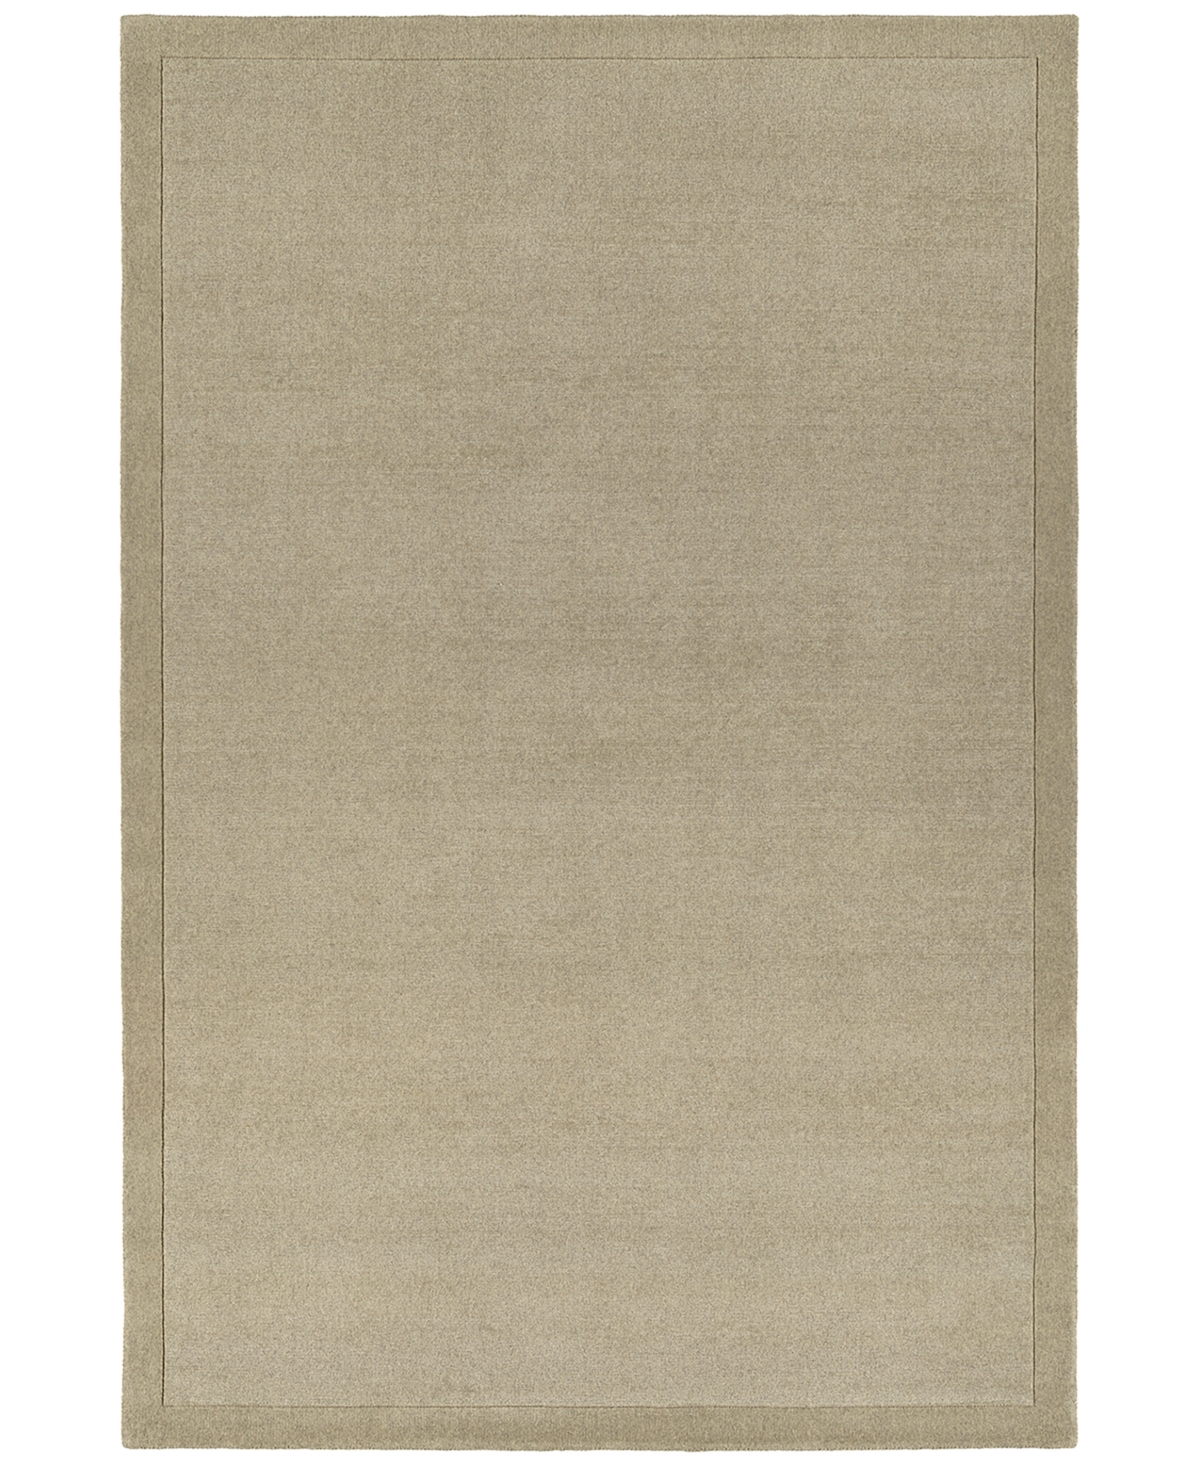 Stanton Rug Company Heaven Hv100 6' X 9' Area Rug In Ivory